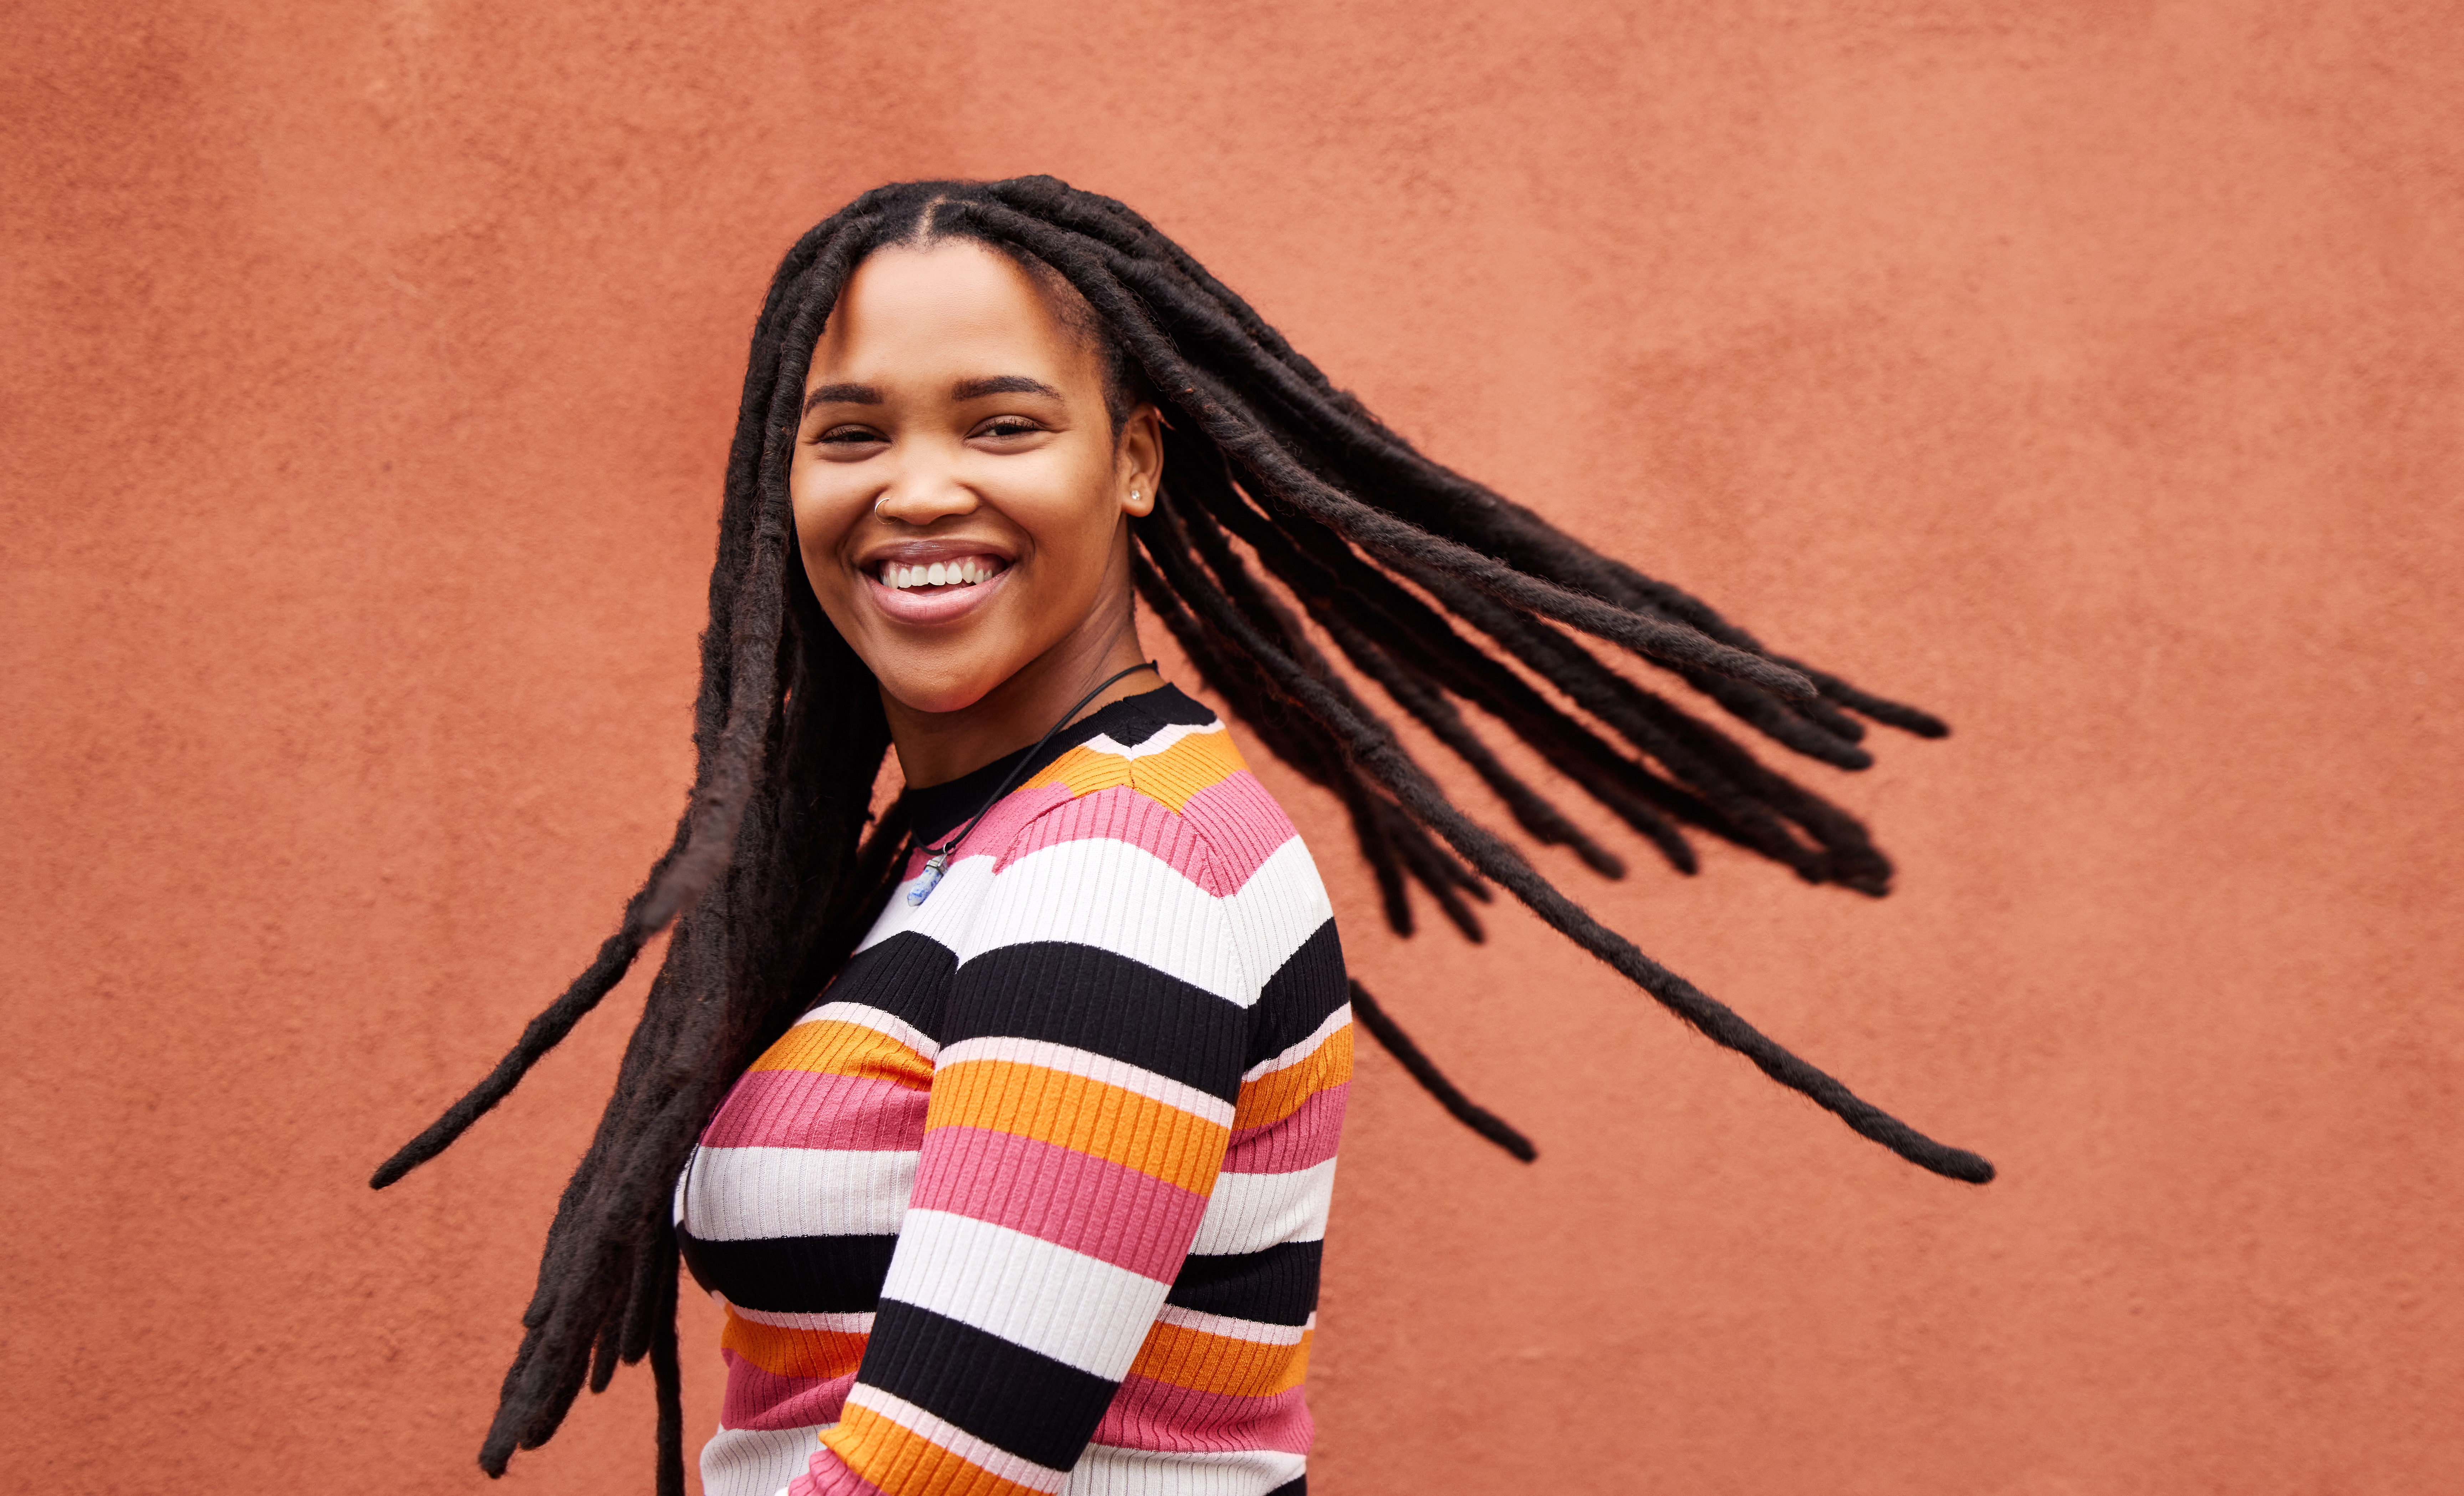 A smiling woman with dreadlocks | Source: Getty Images